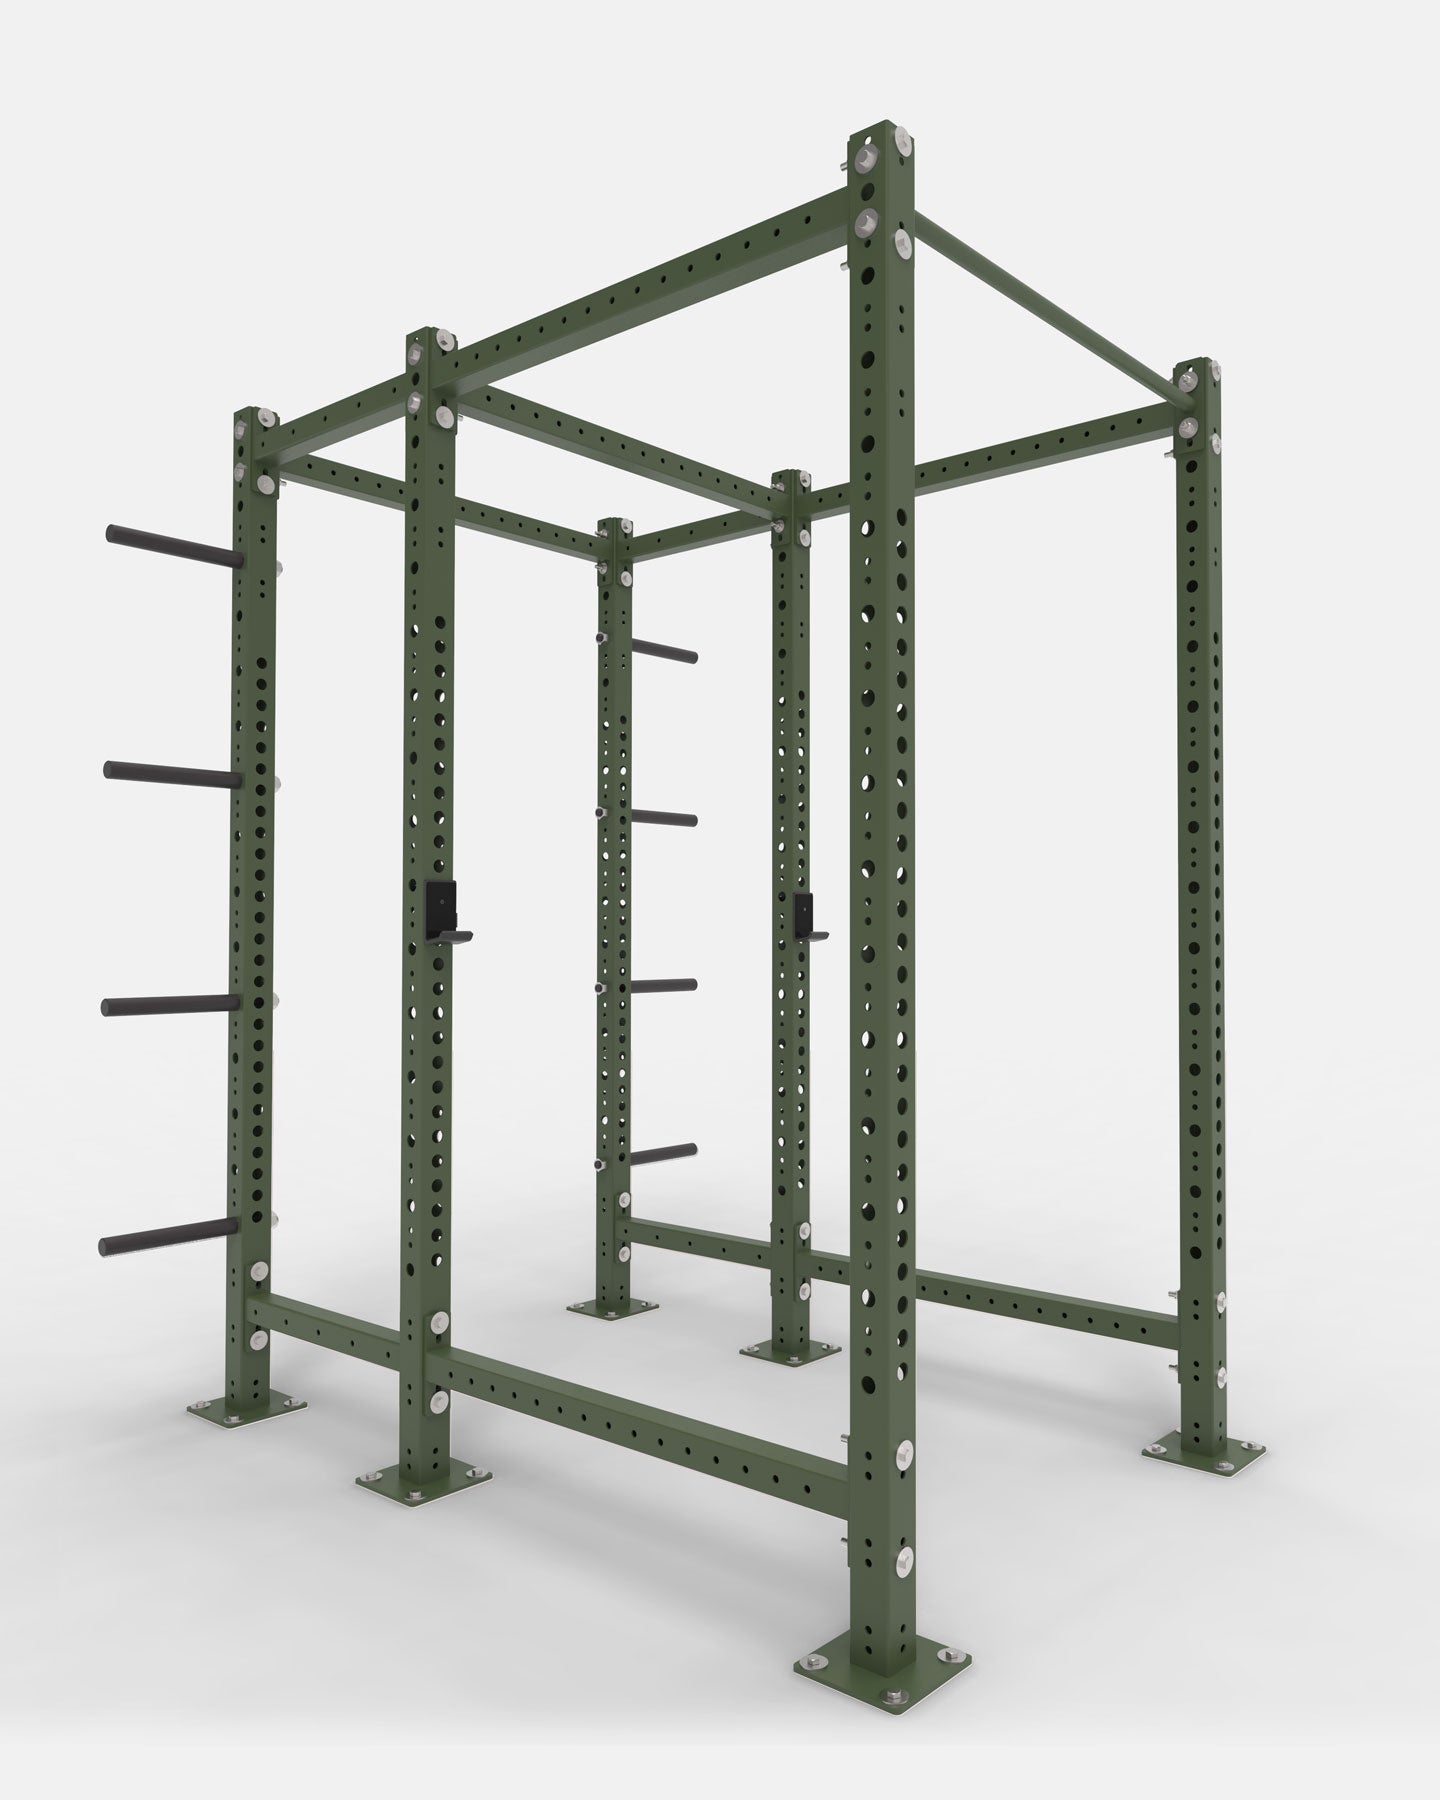 Power Racks - Power Cages